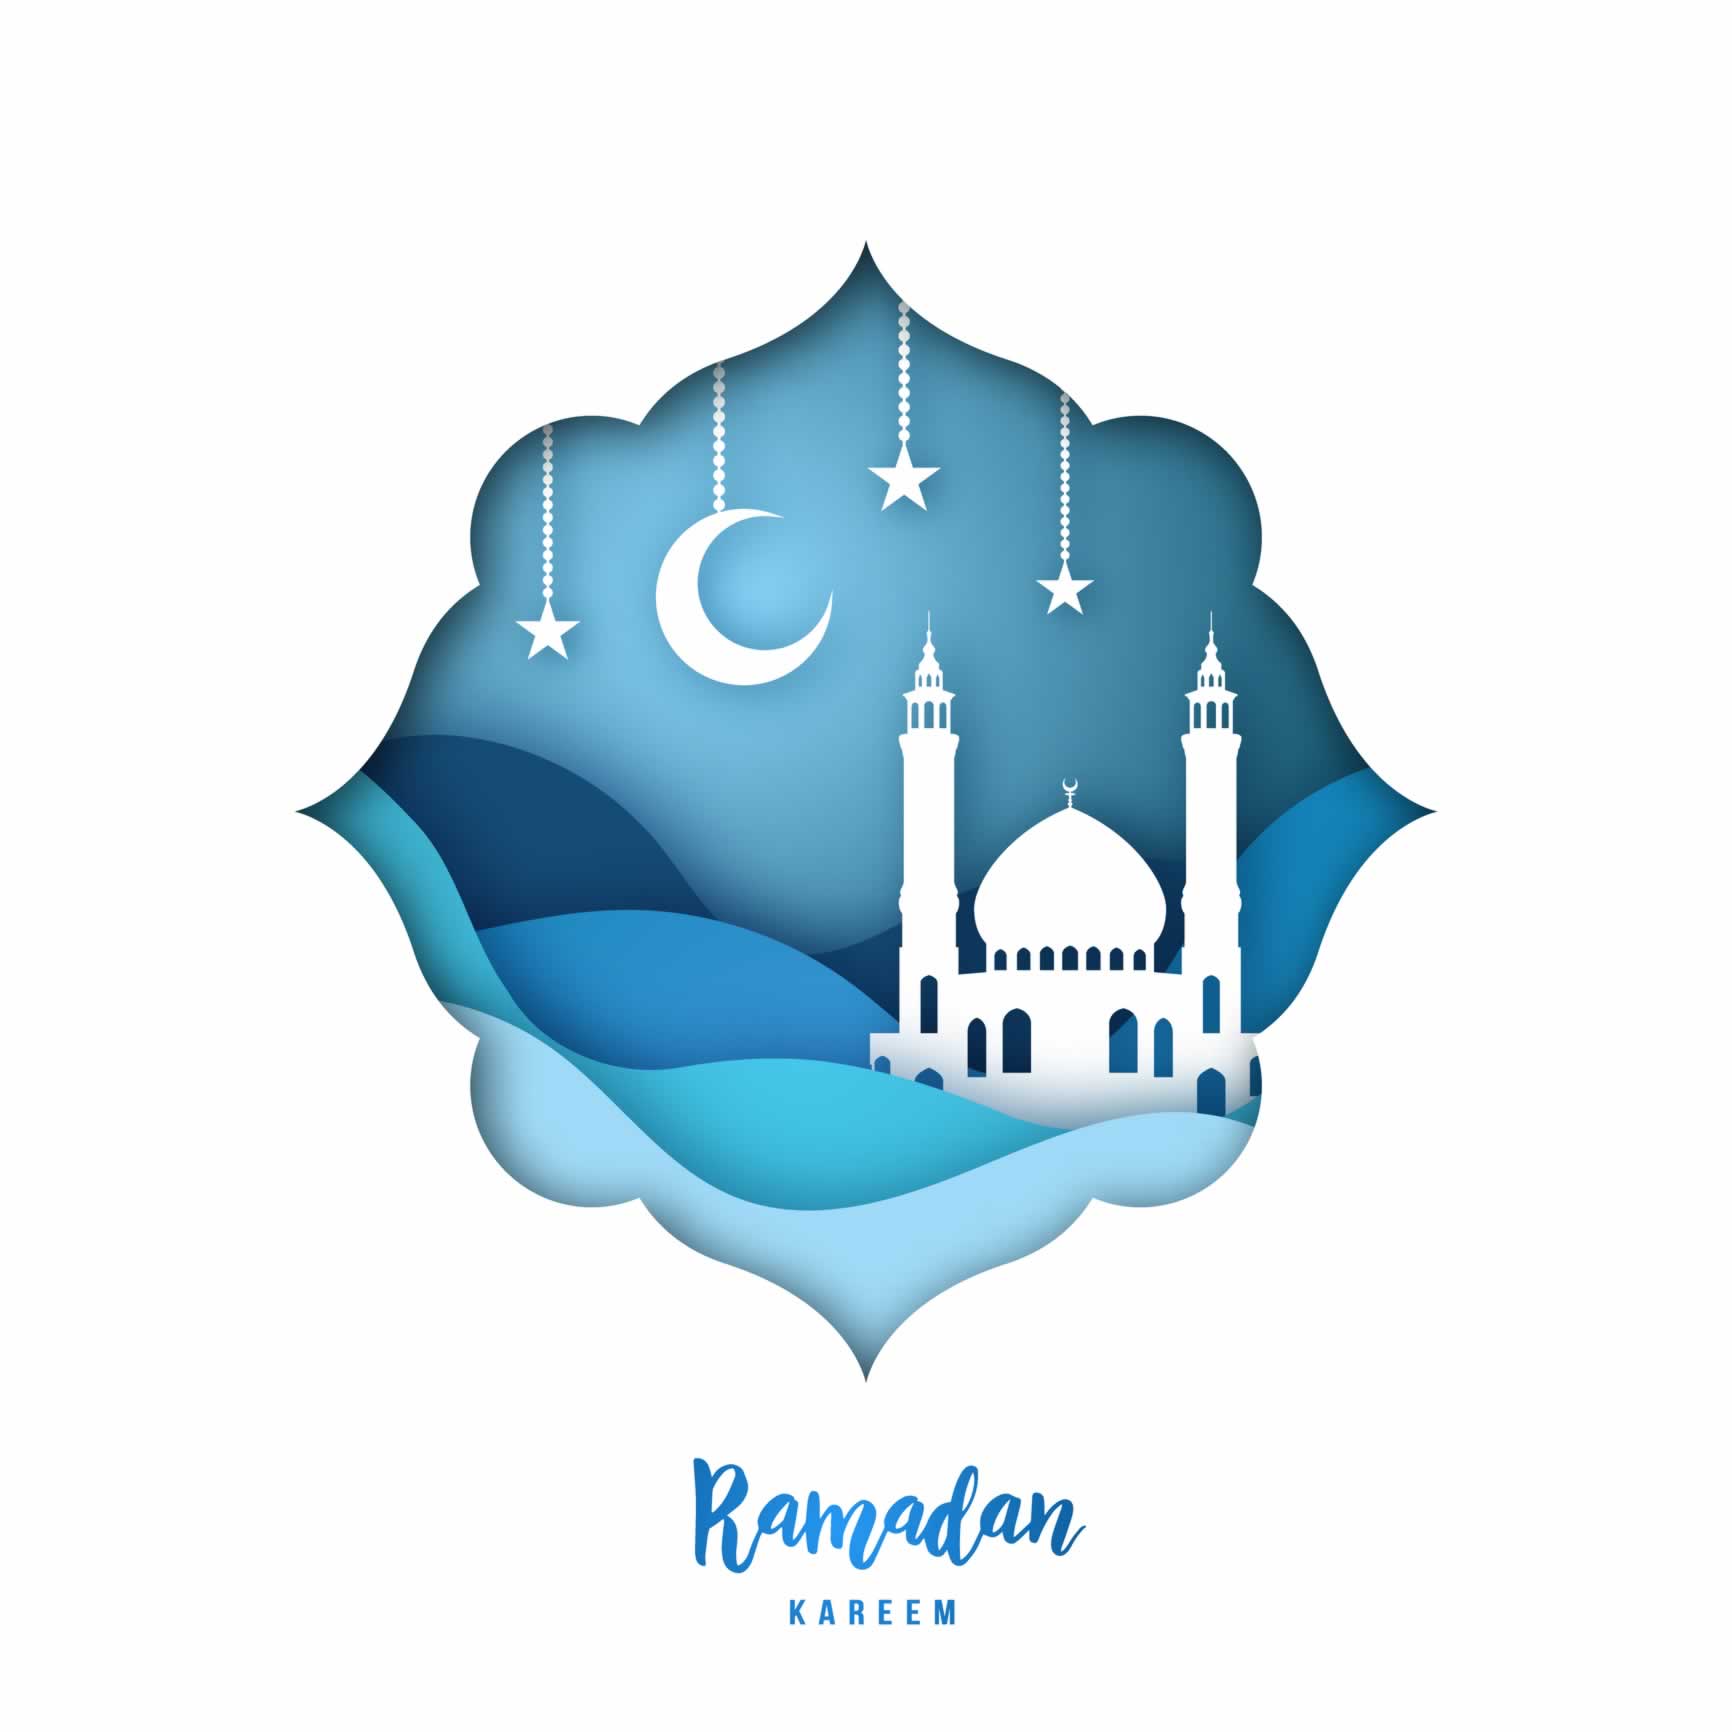 Illustration of a mosque under a night sky with the text: "Ramadan kareem"